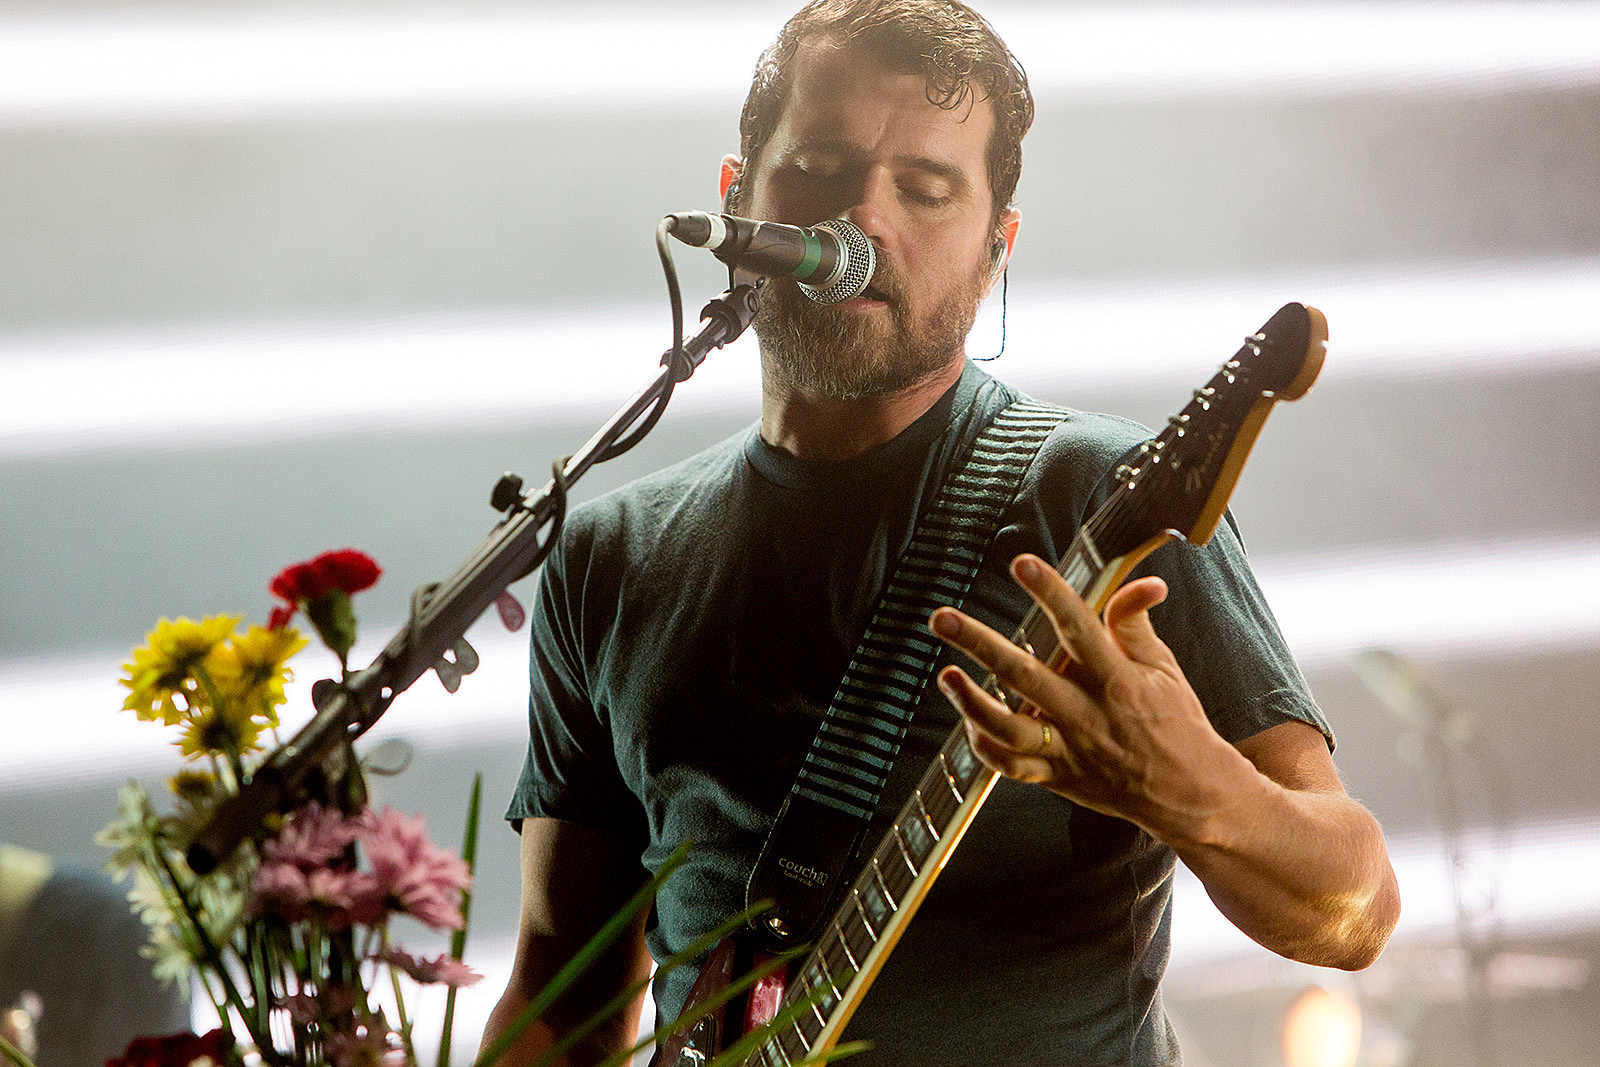 Brand New singer Jesse Lacey issues Facebook apology